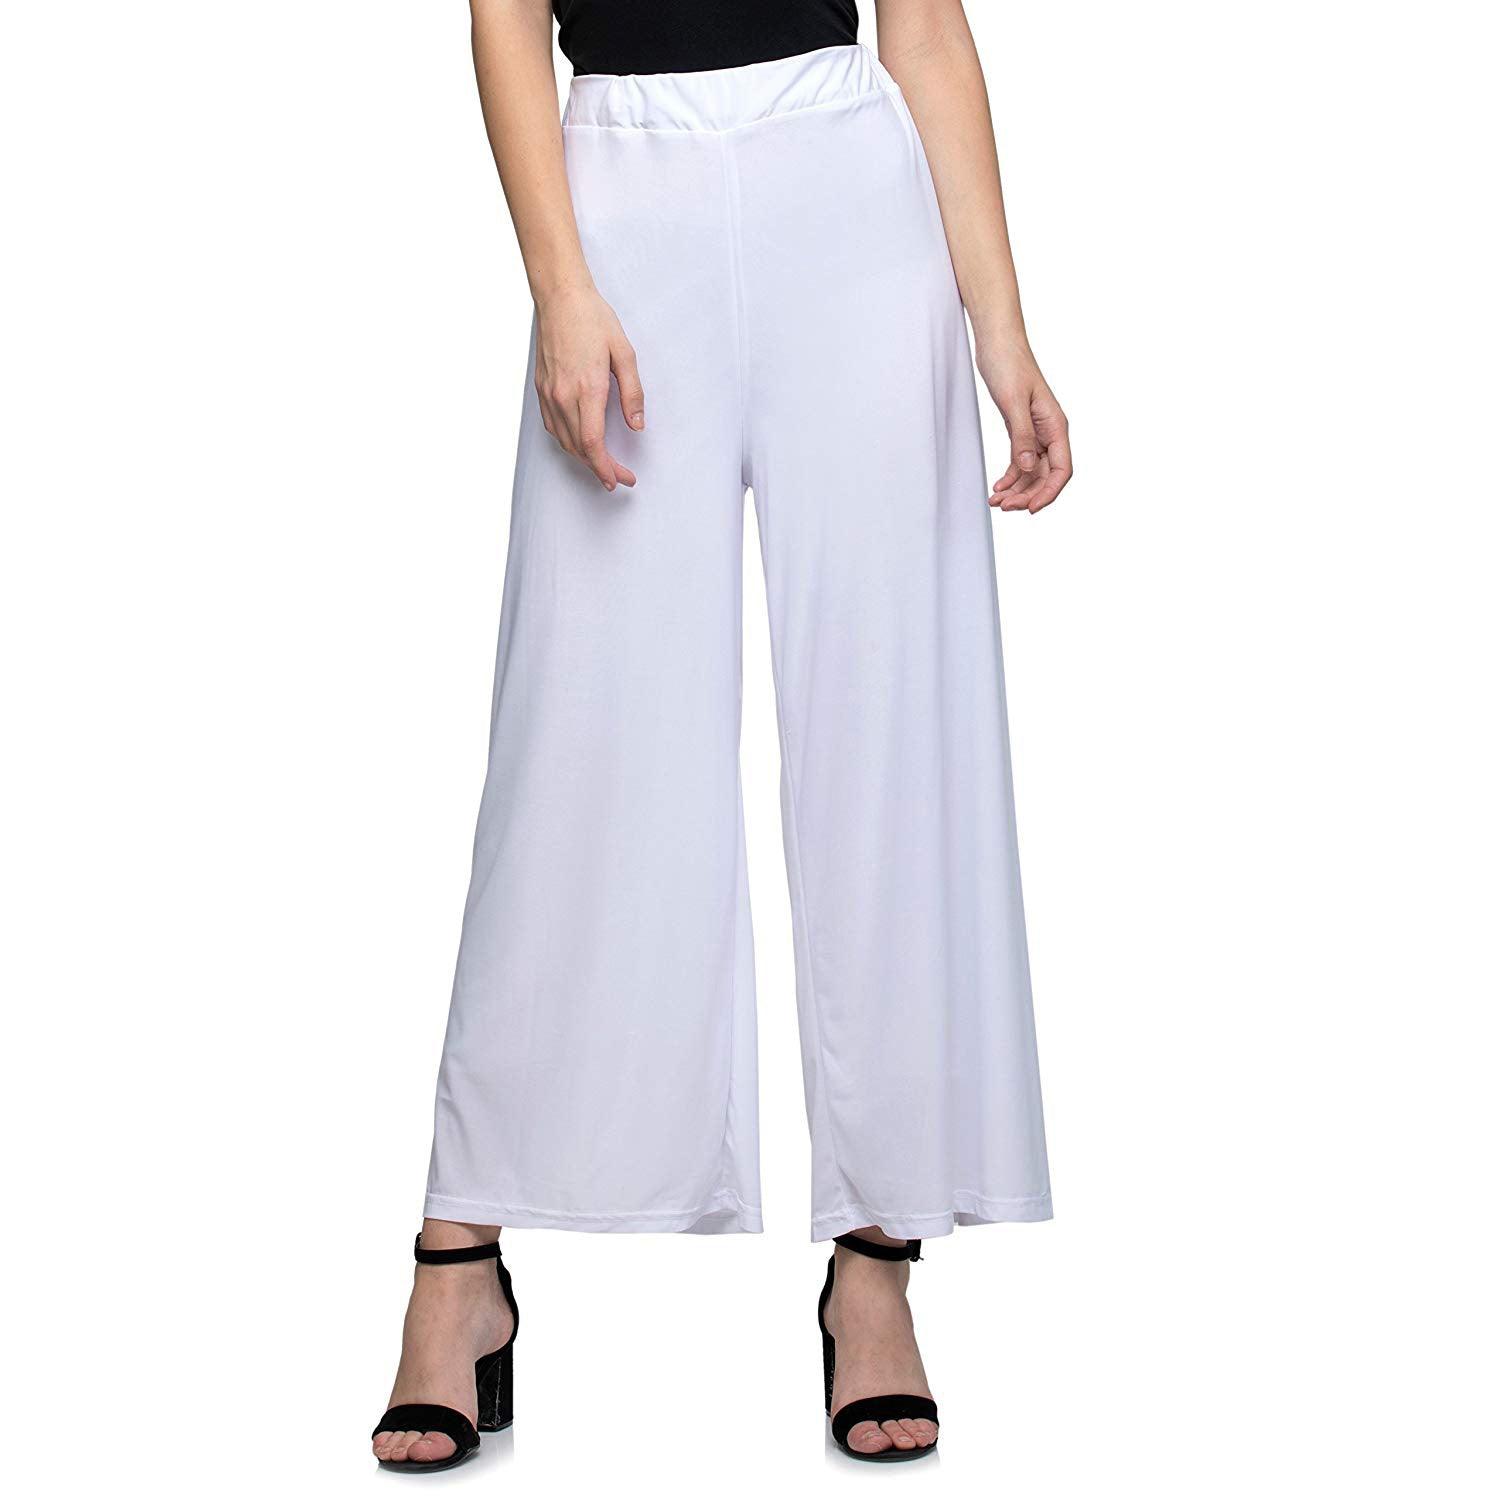 Women's Casual Wide Leg Solid Color Mid Rise Loose Fit Palazzo Pants (One Size, White) - Walgrow.com